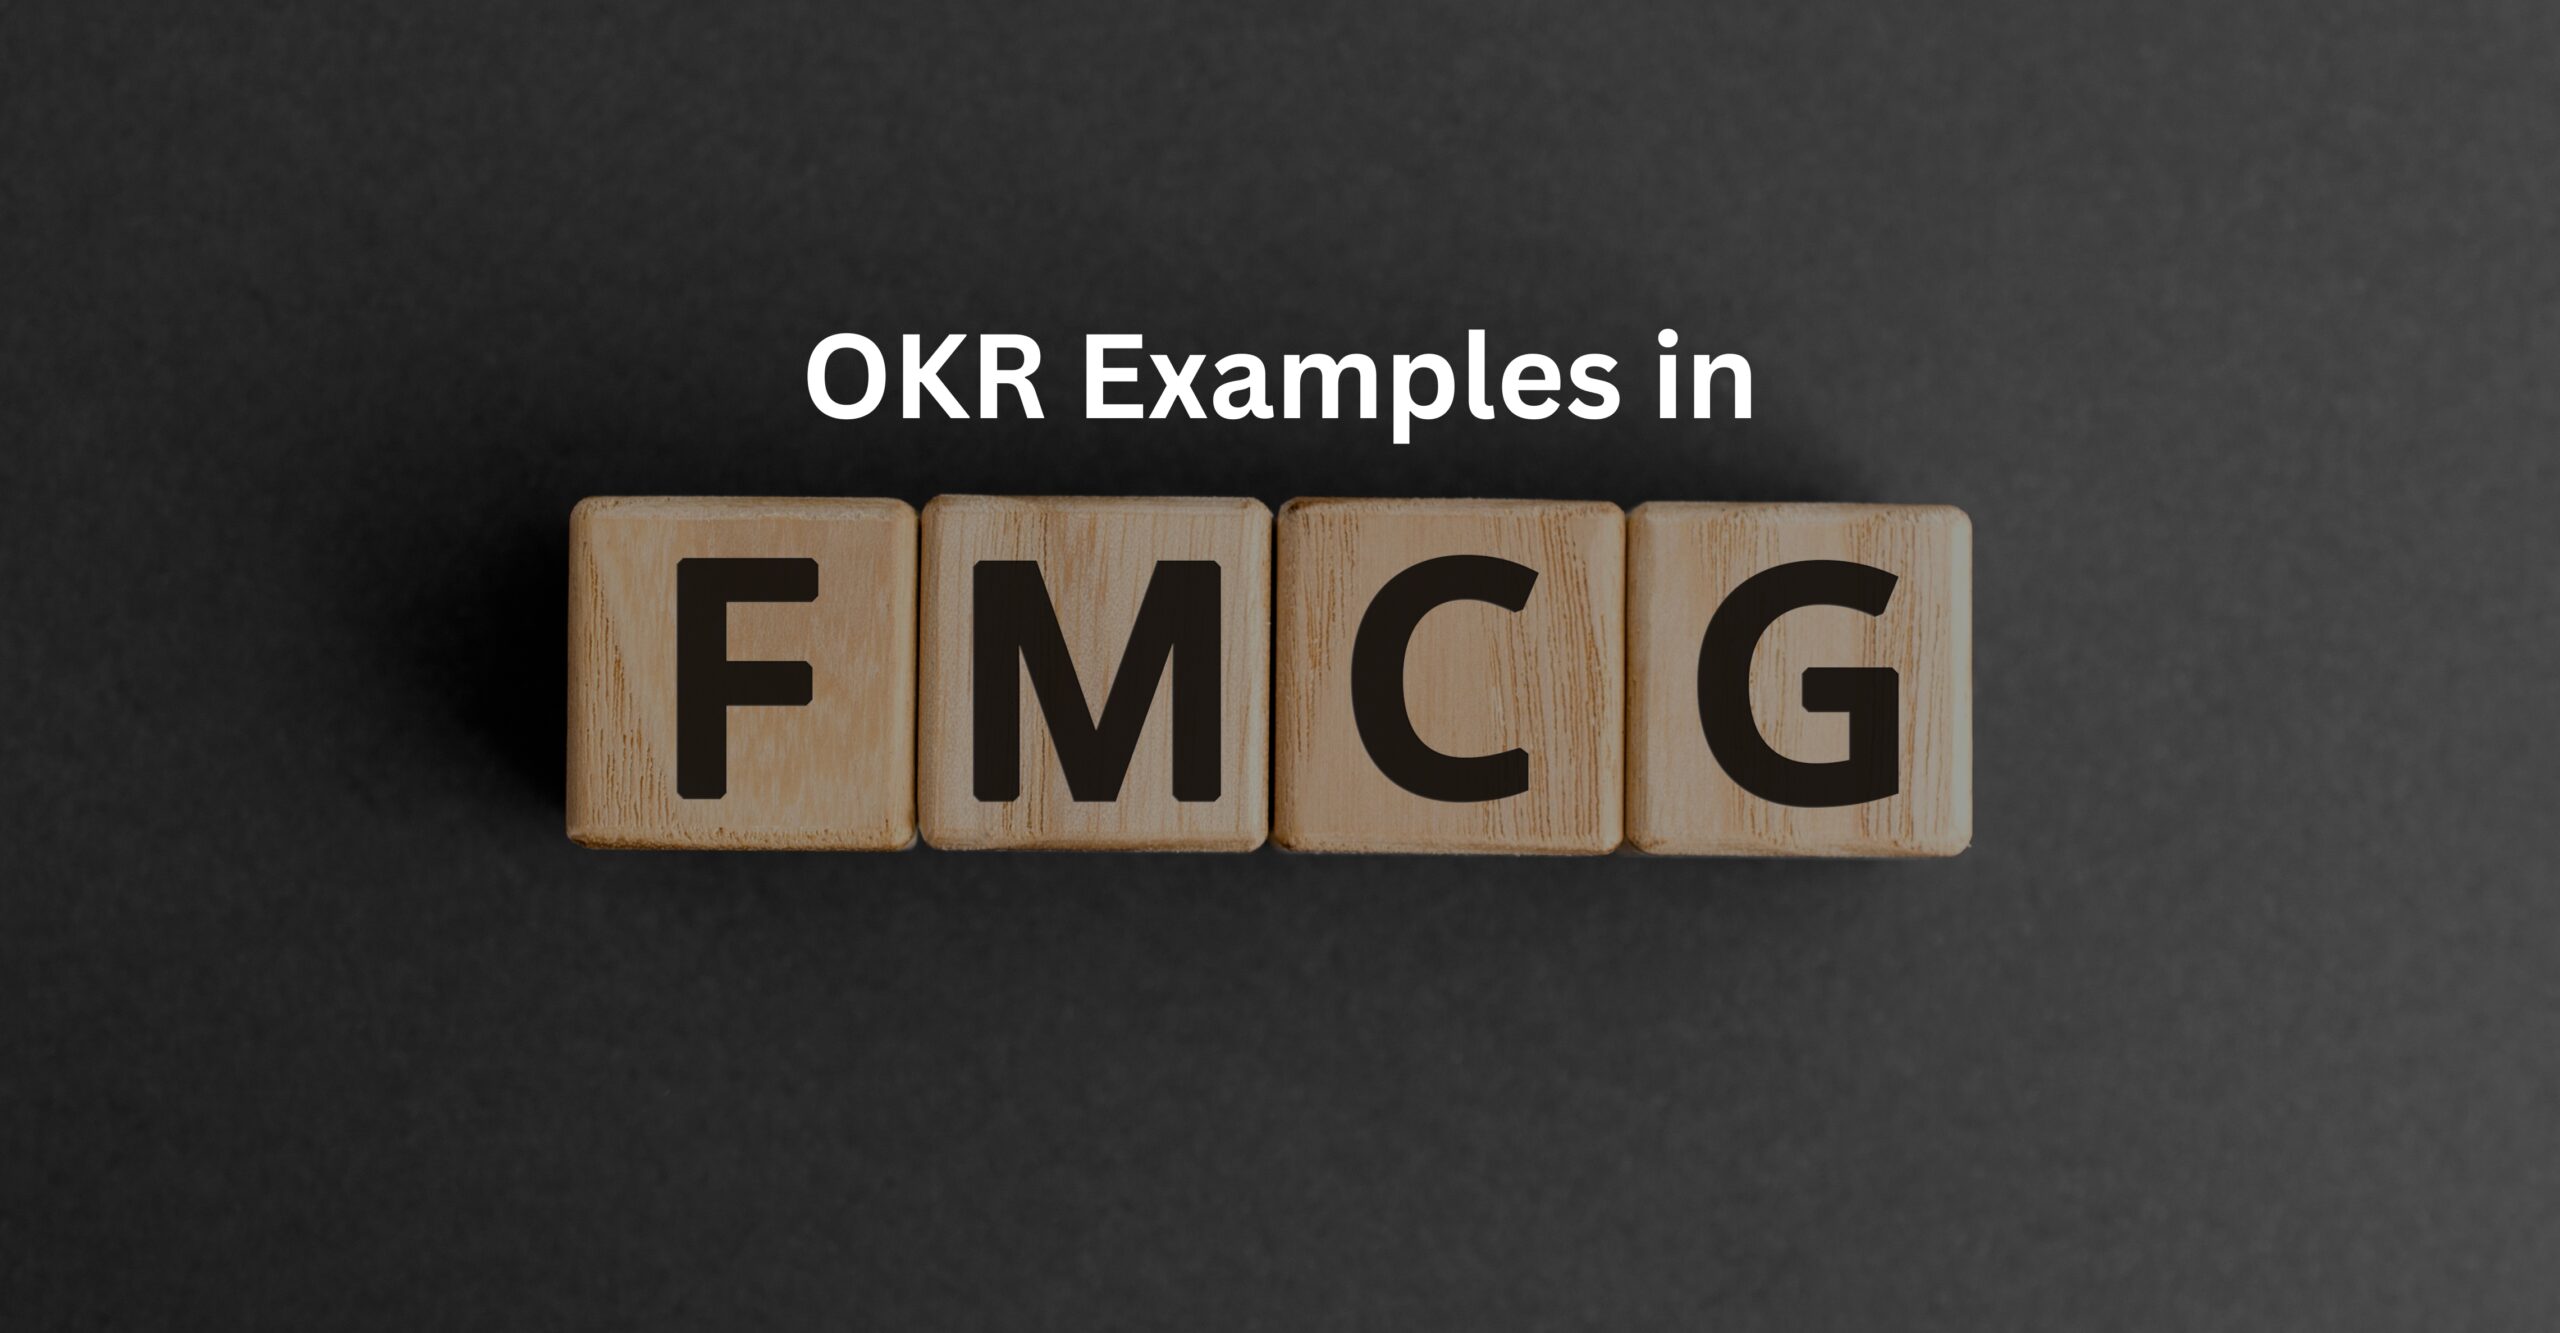 OKR Examples in FMCG